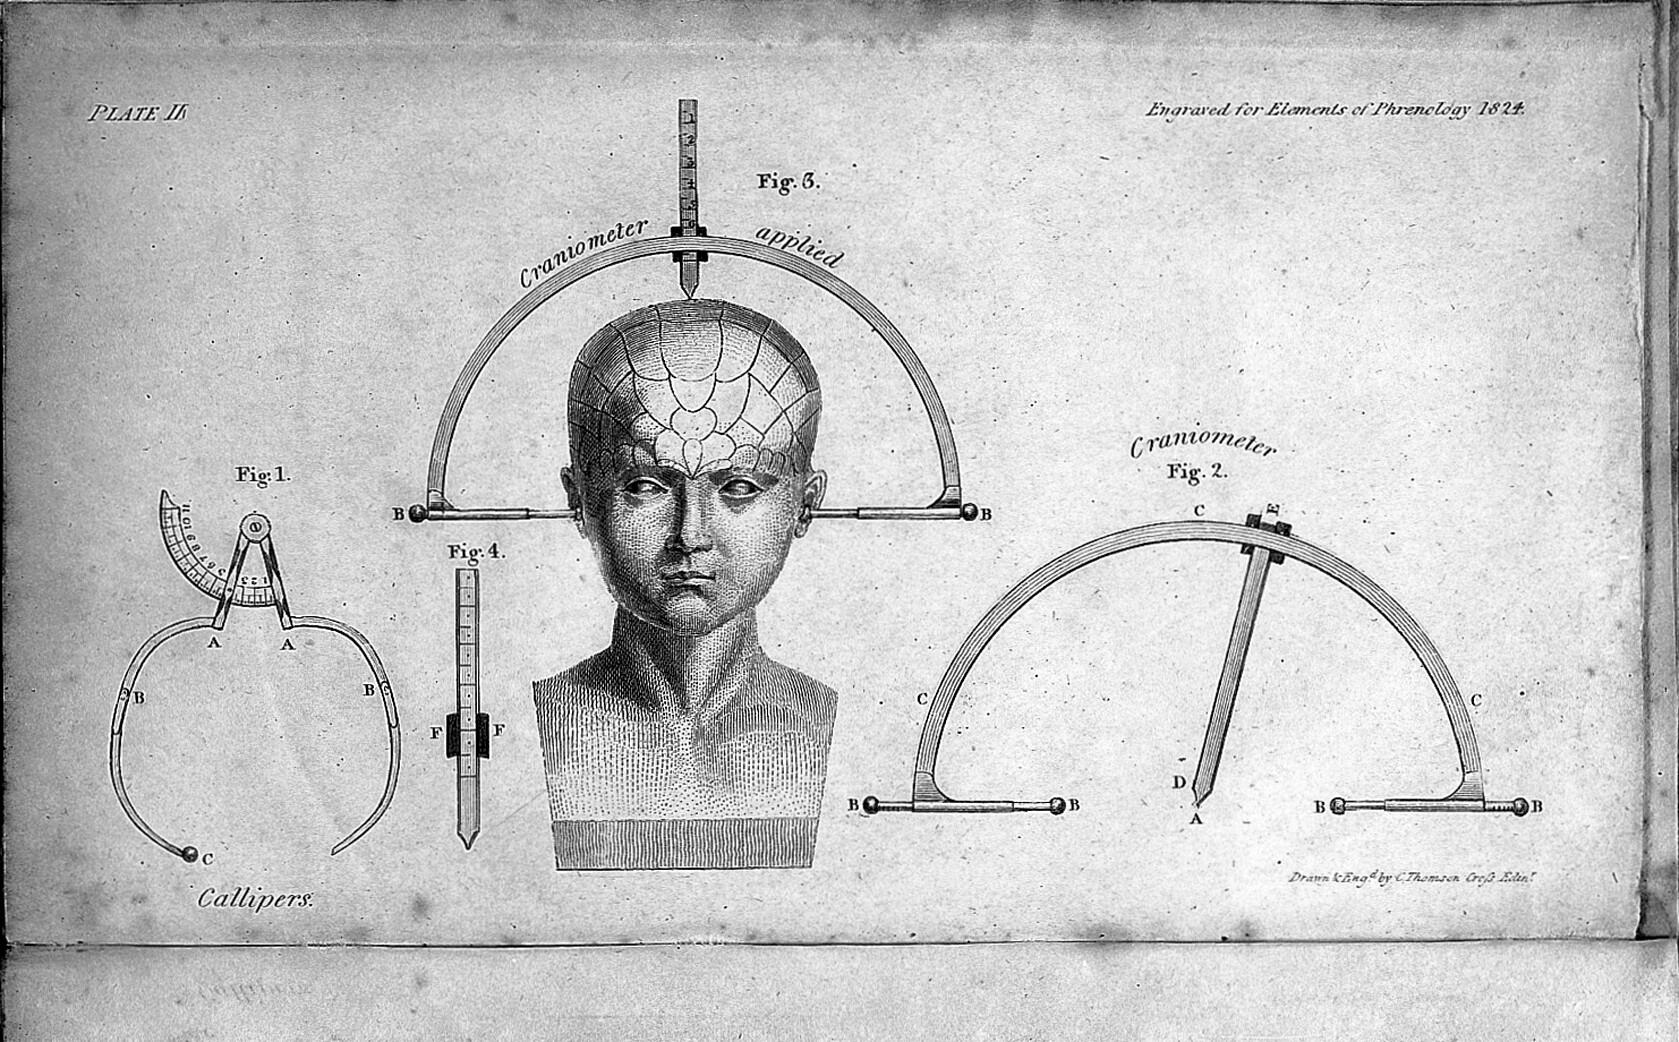 George Combe's depiction of several phrenological measuring devices, including calipers and a craniometer attached to a head.